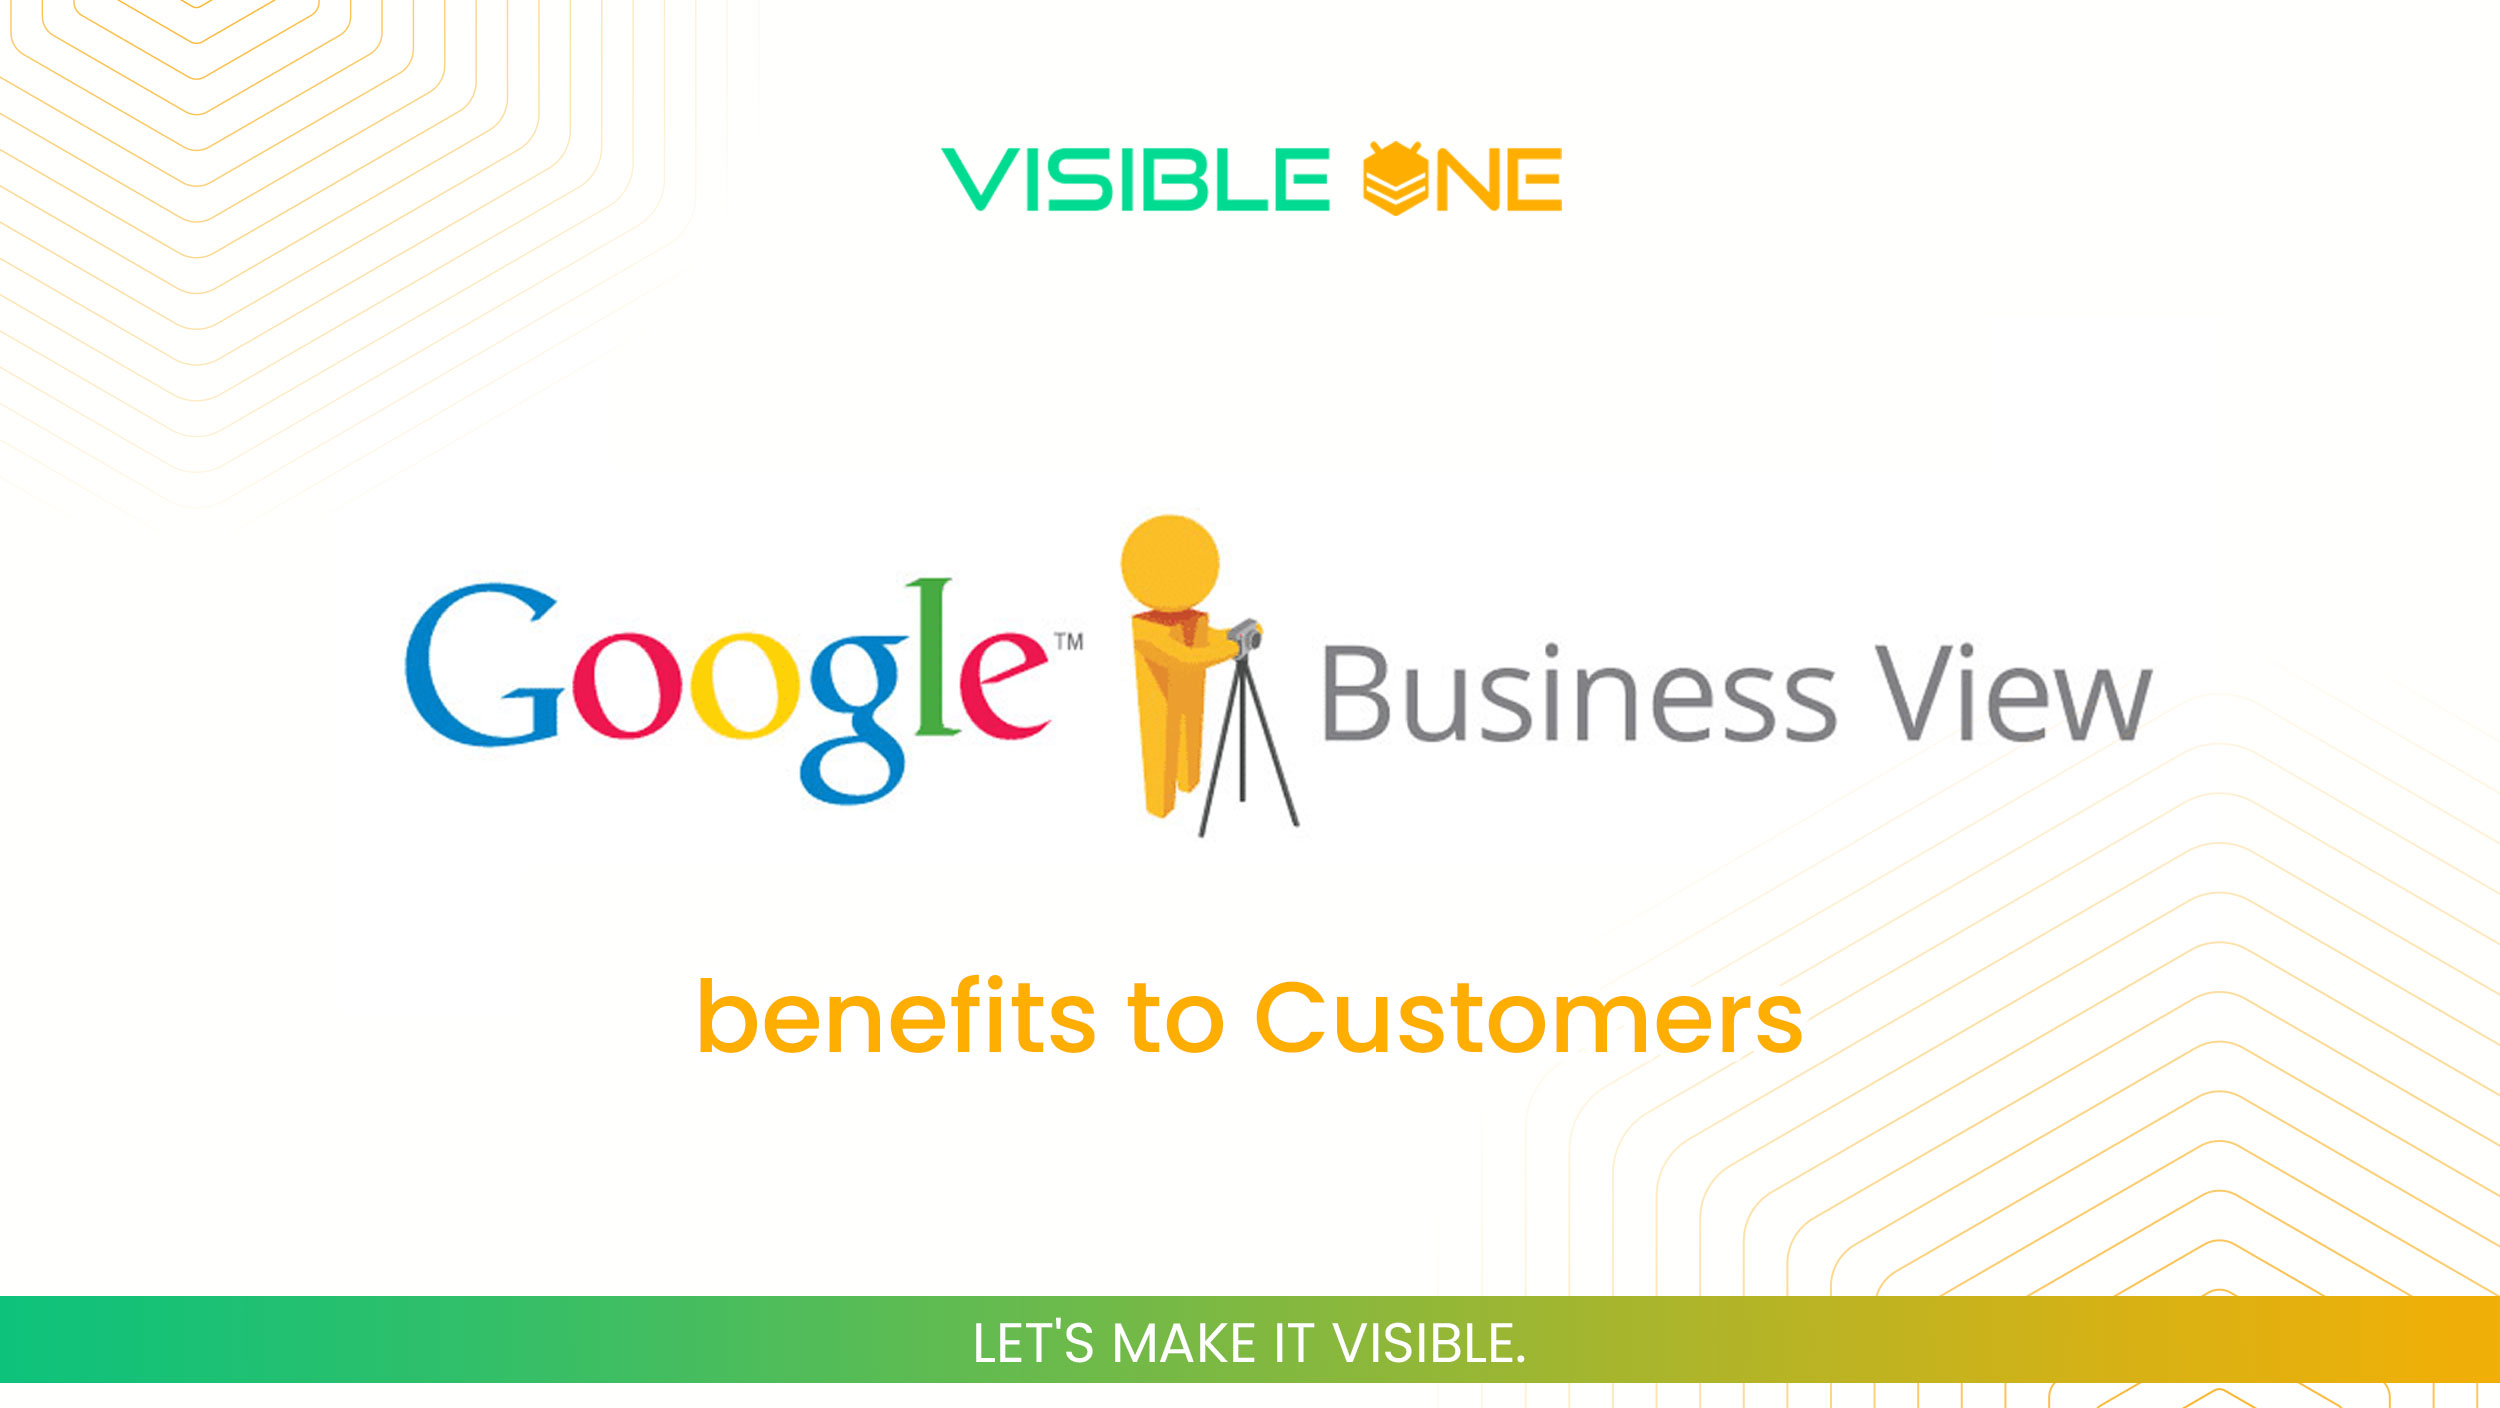 google business view vector, visible one